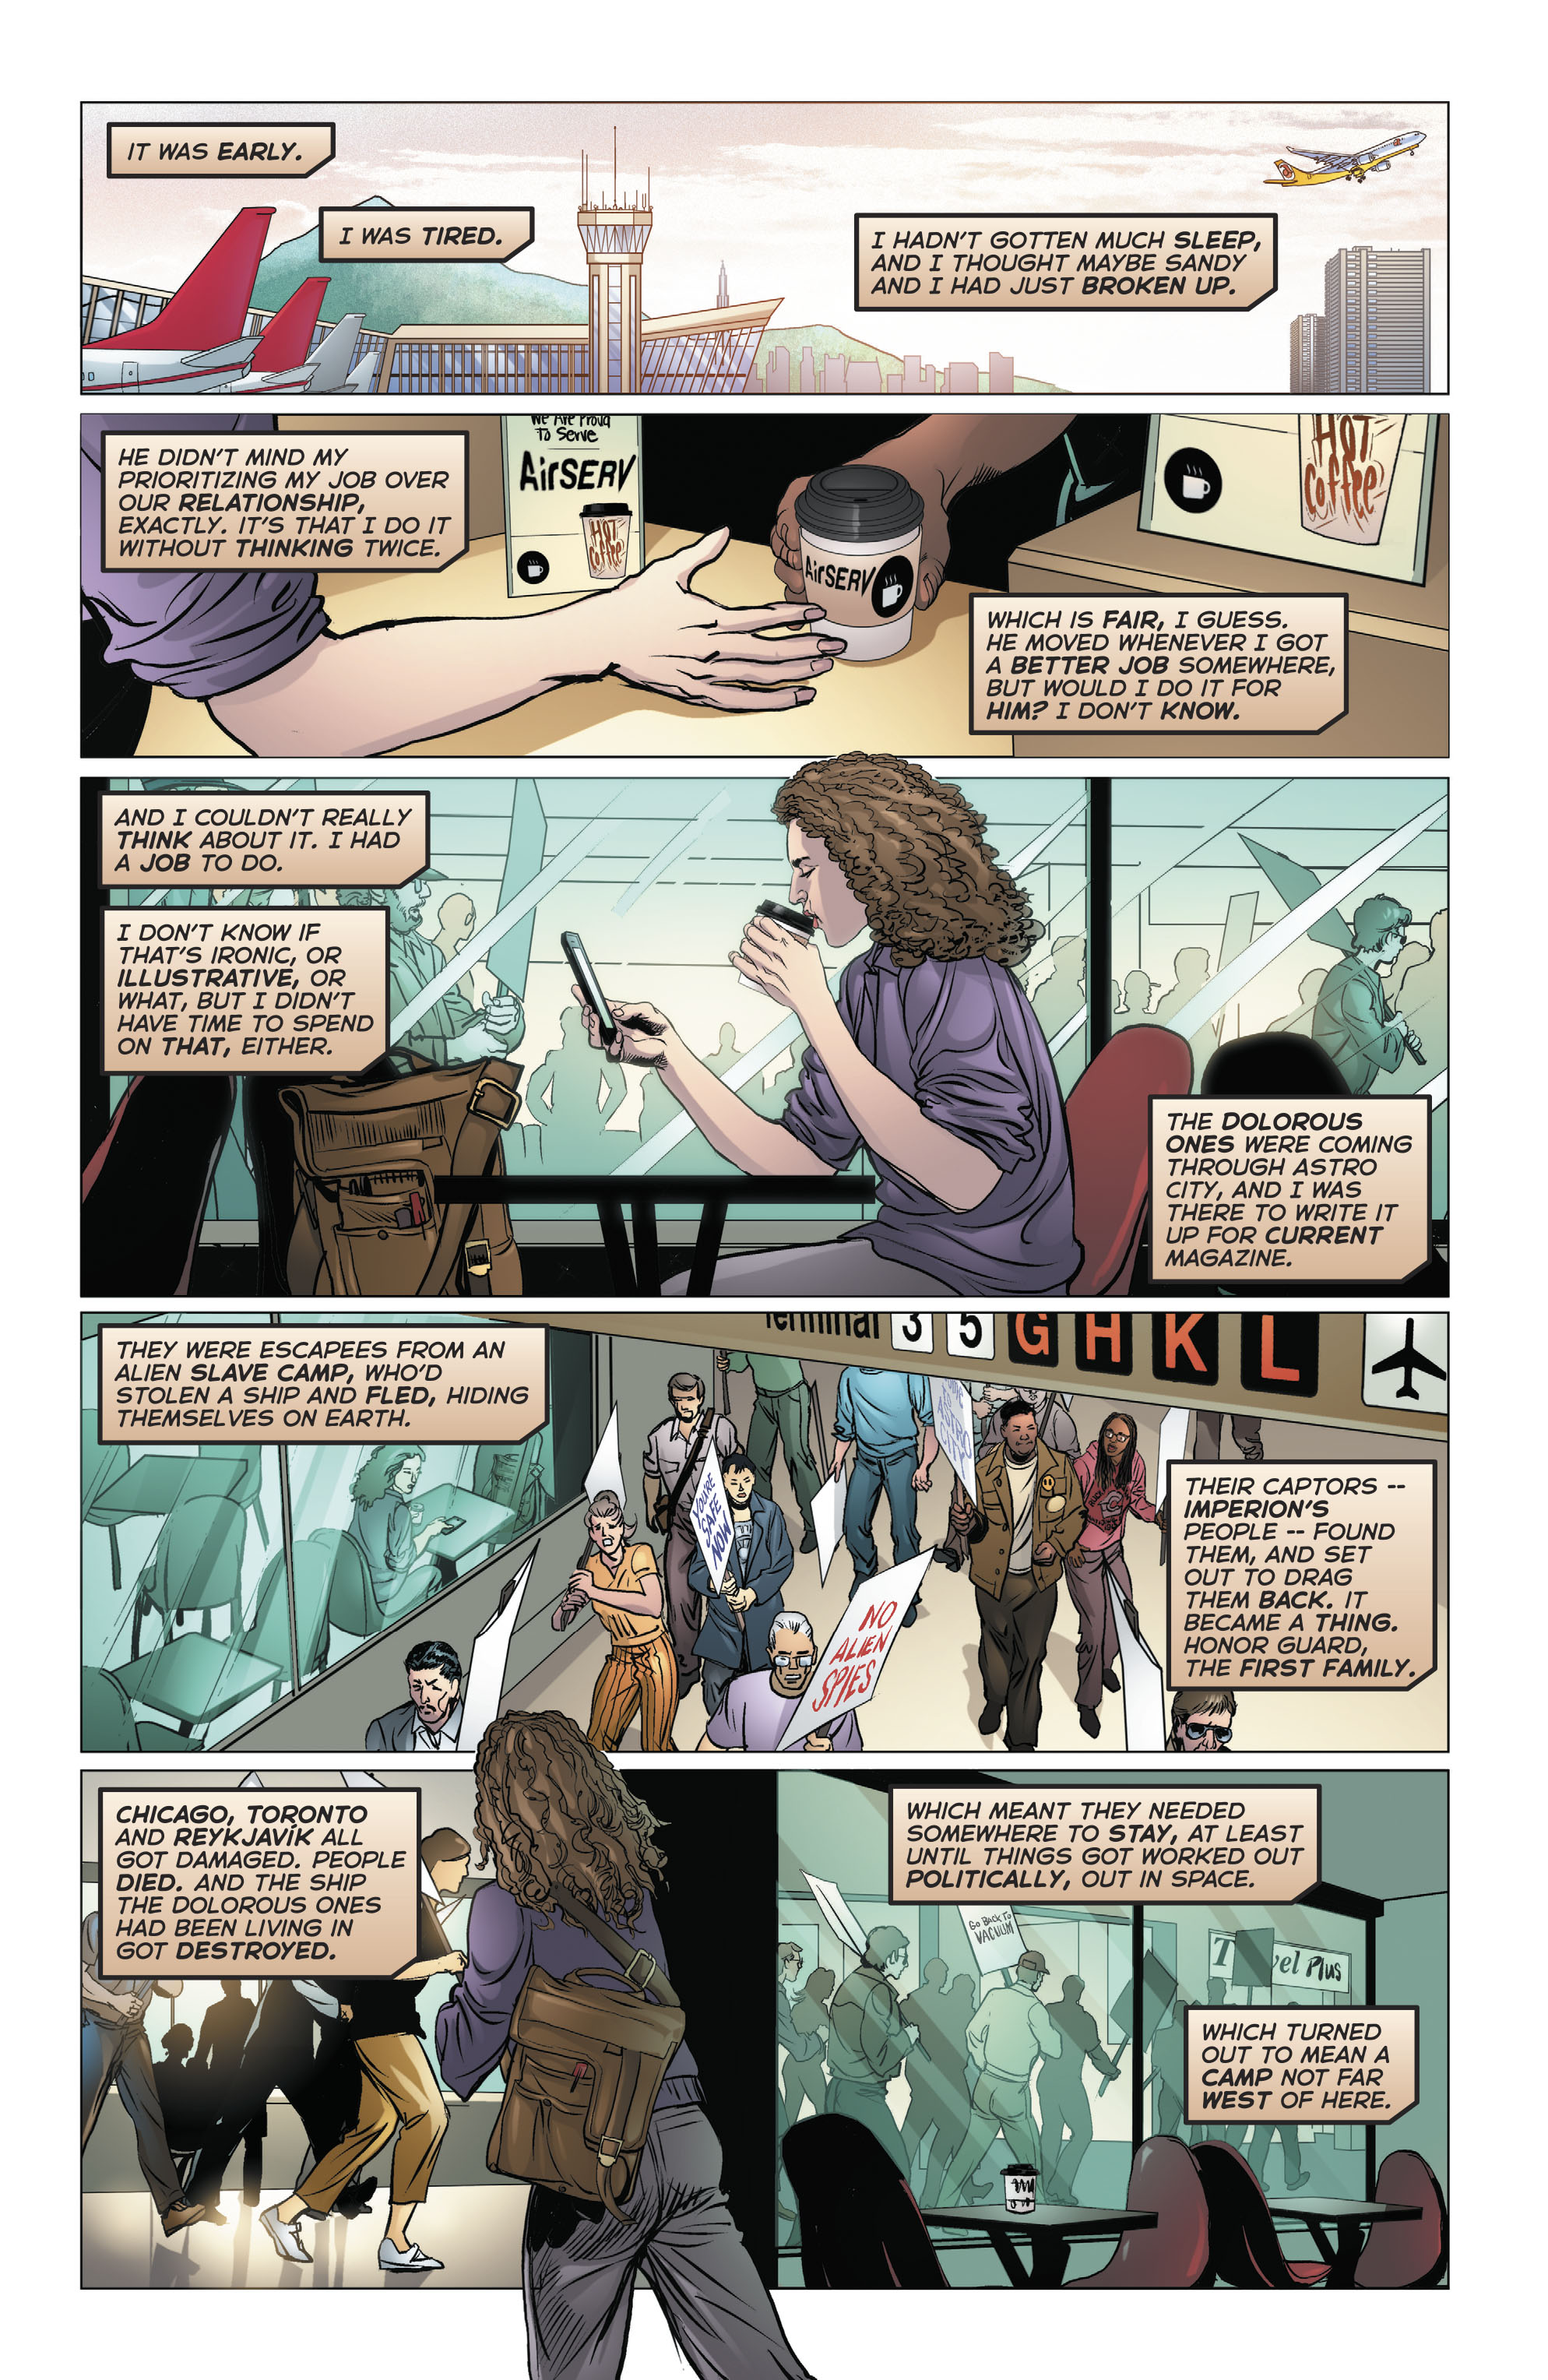 Astro City (2013-): Chapter 49 - Page 2